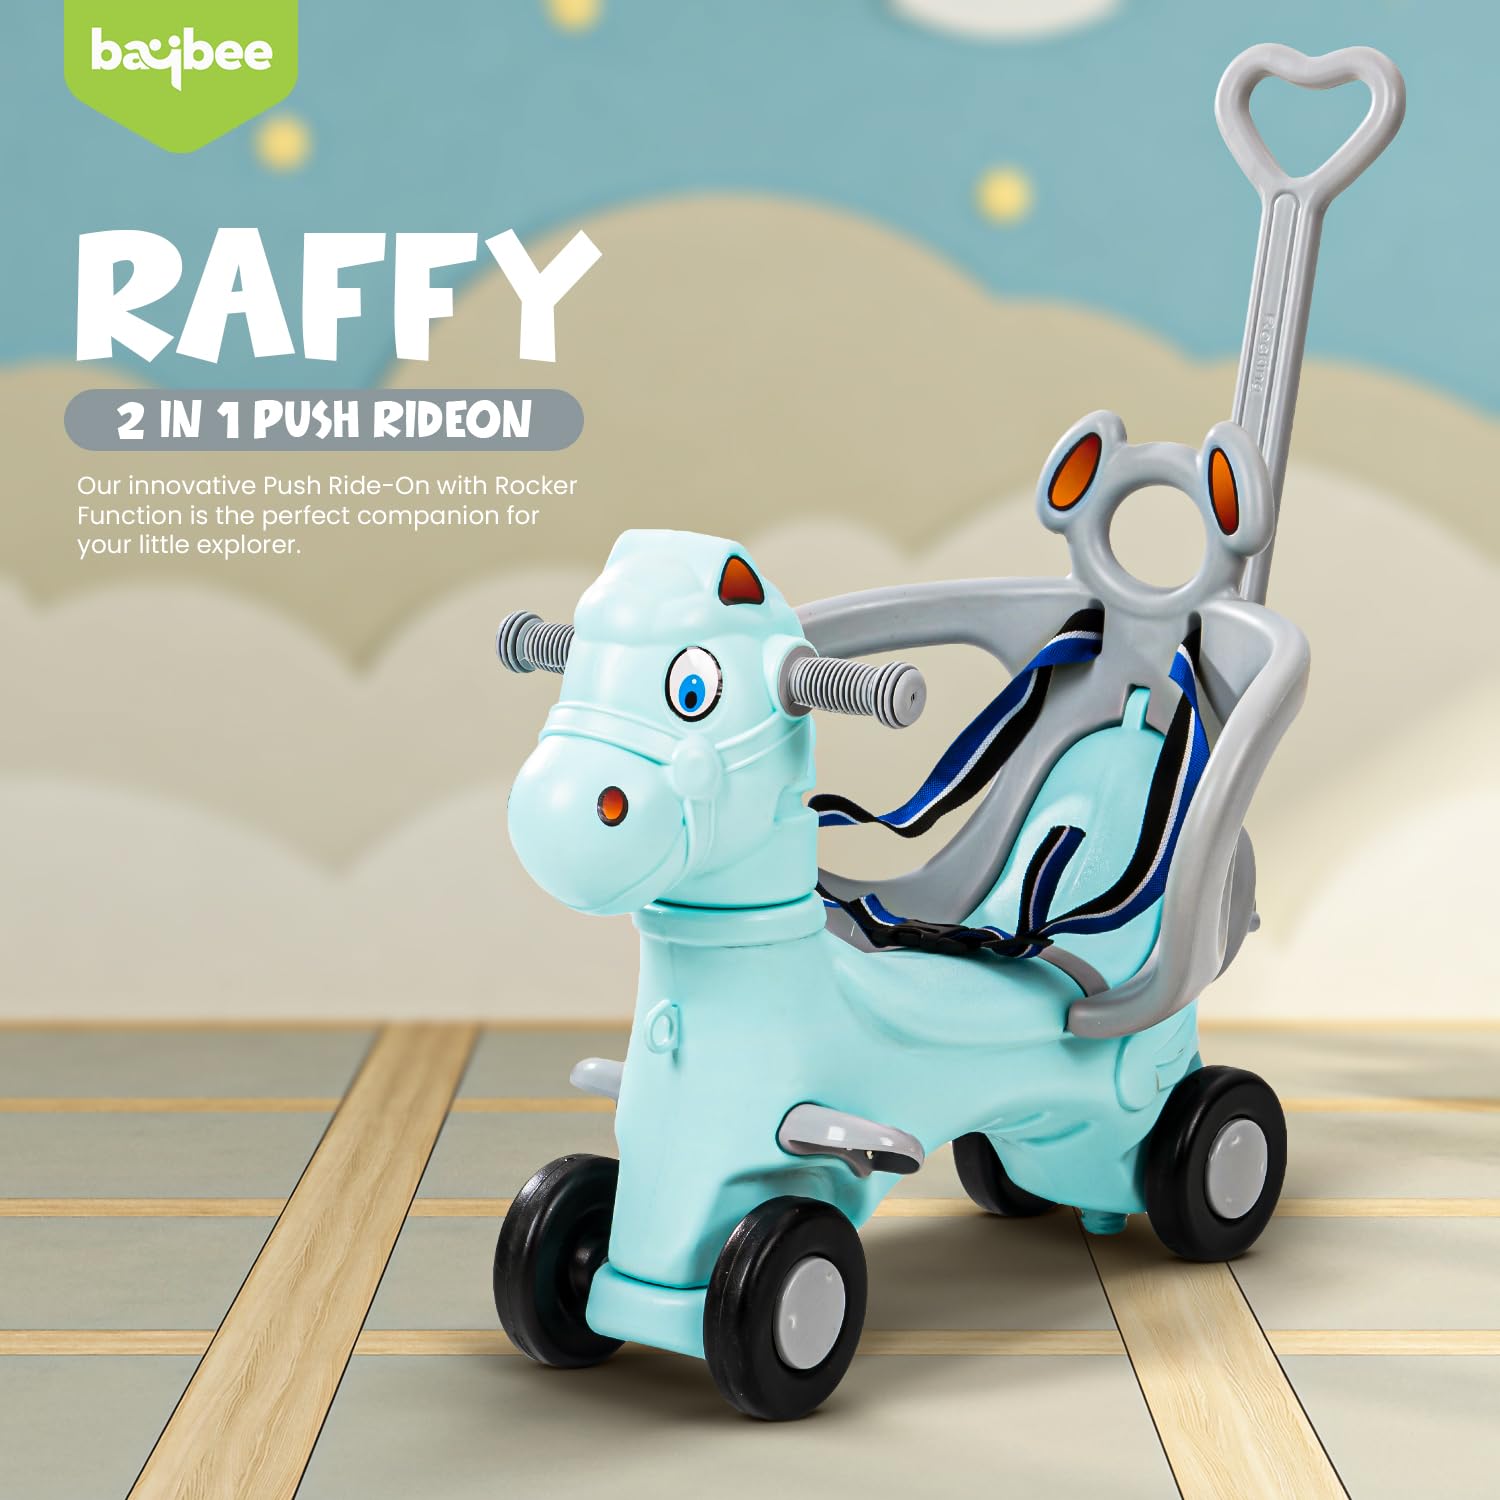 Baybee 3 in 1 Baby Horse Rider Kids Ride On Car for Kids, Push Ride on Toy with Rocker, Push Handle, Rotating Head & Safety Belt | Baby Car Rocking Horse | Kids Car for Toddlers 1 to 3 Year Boy Girl